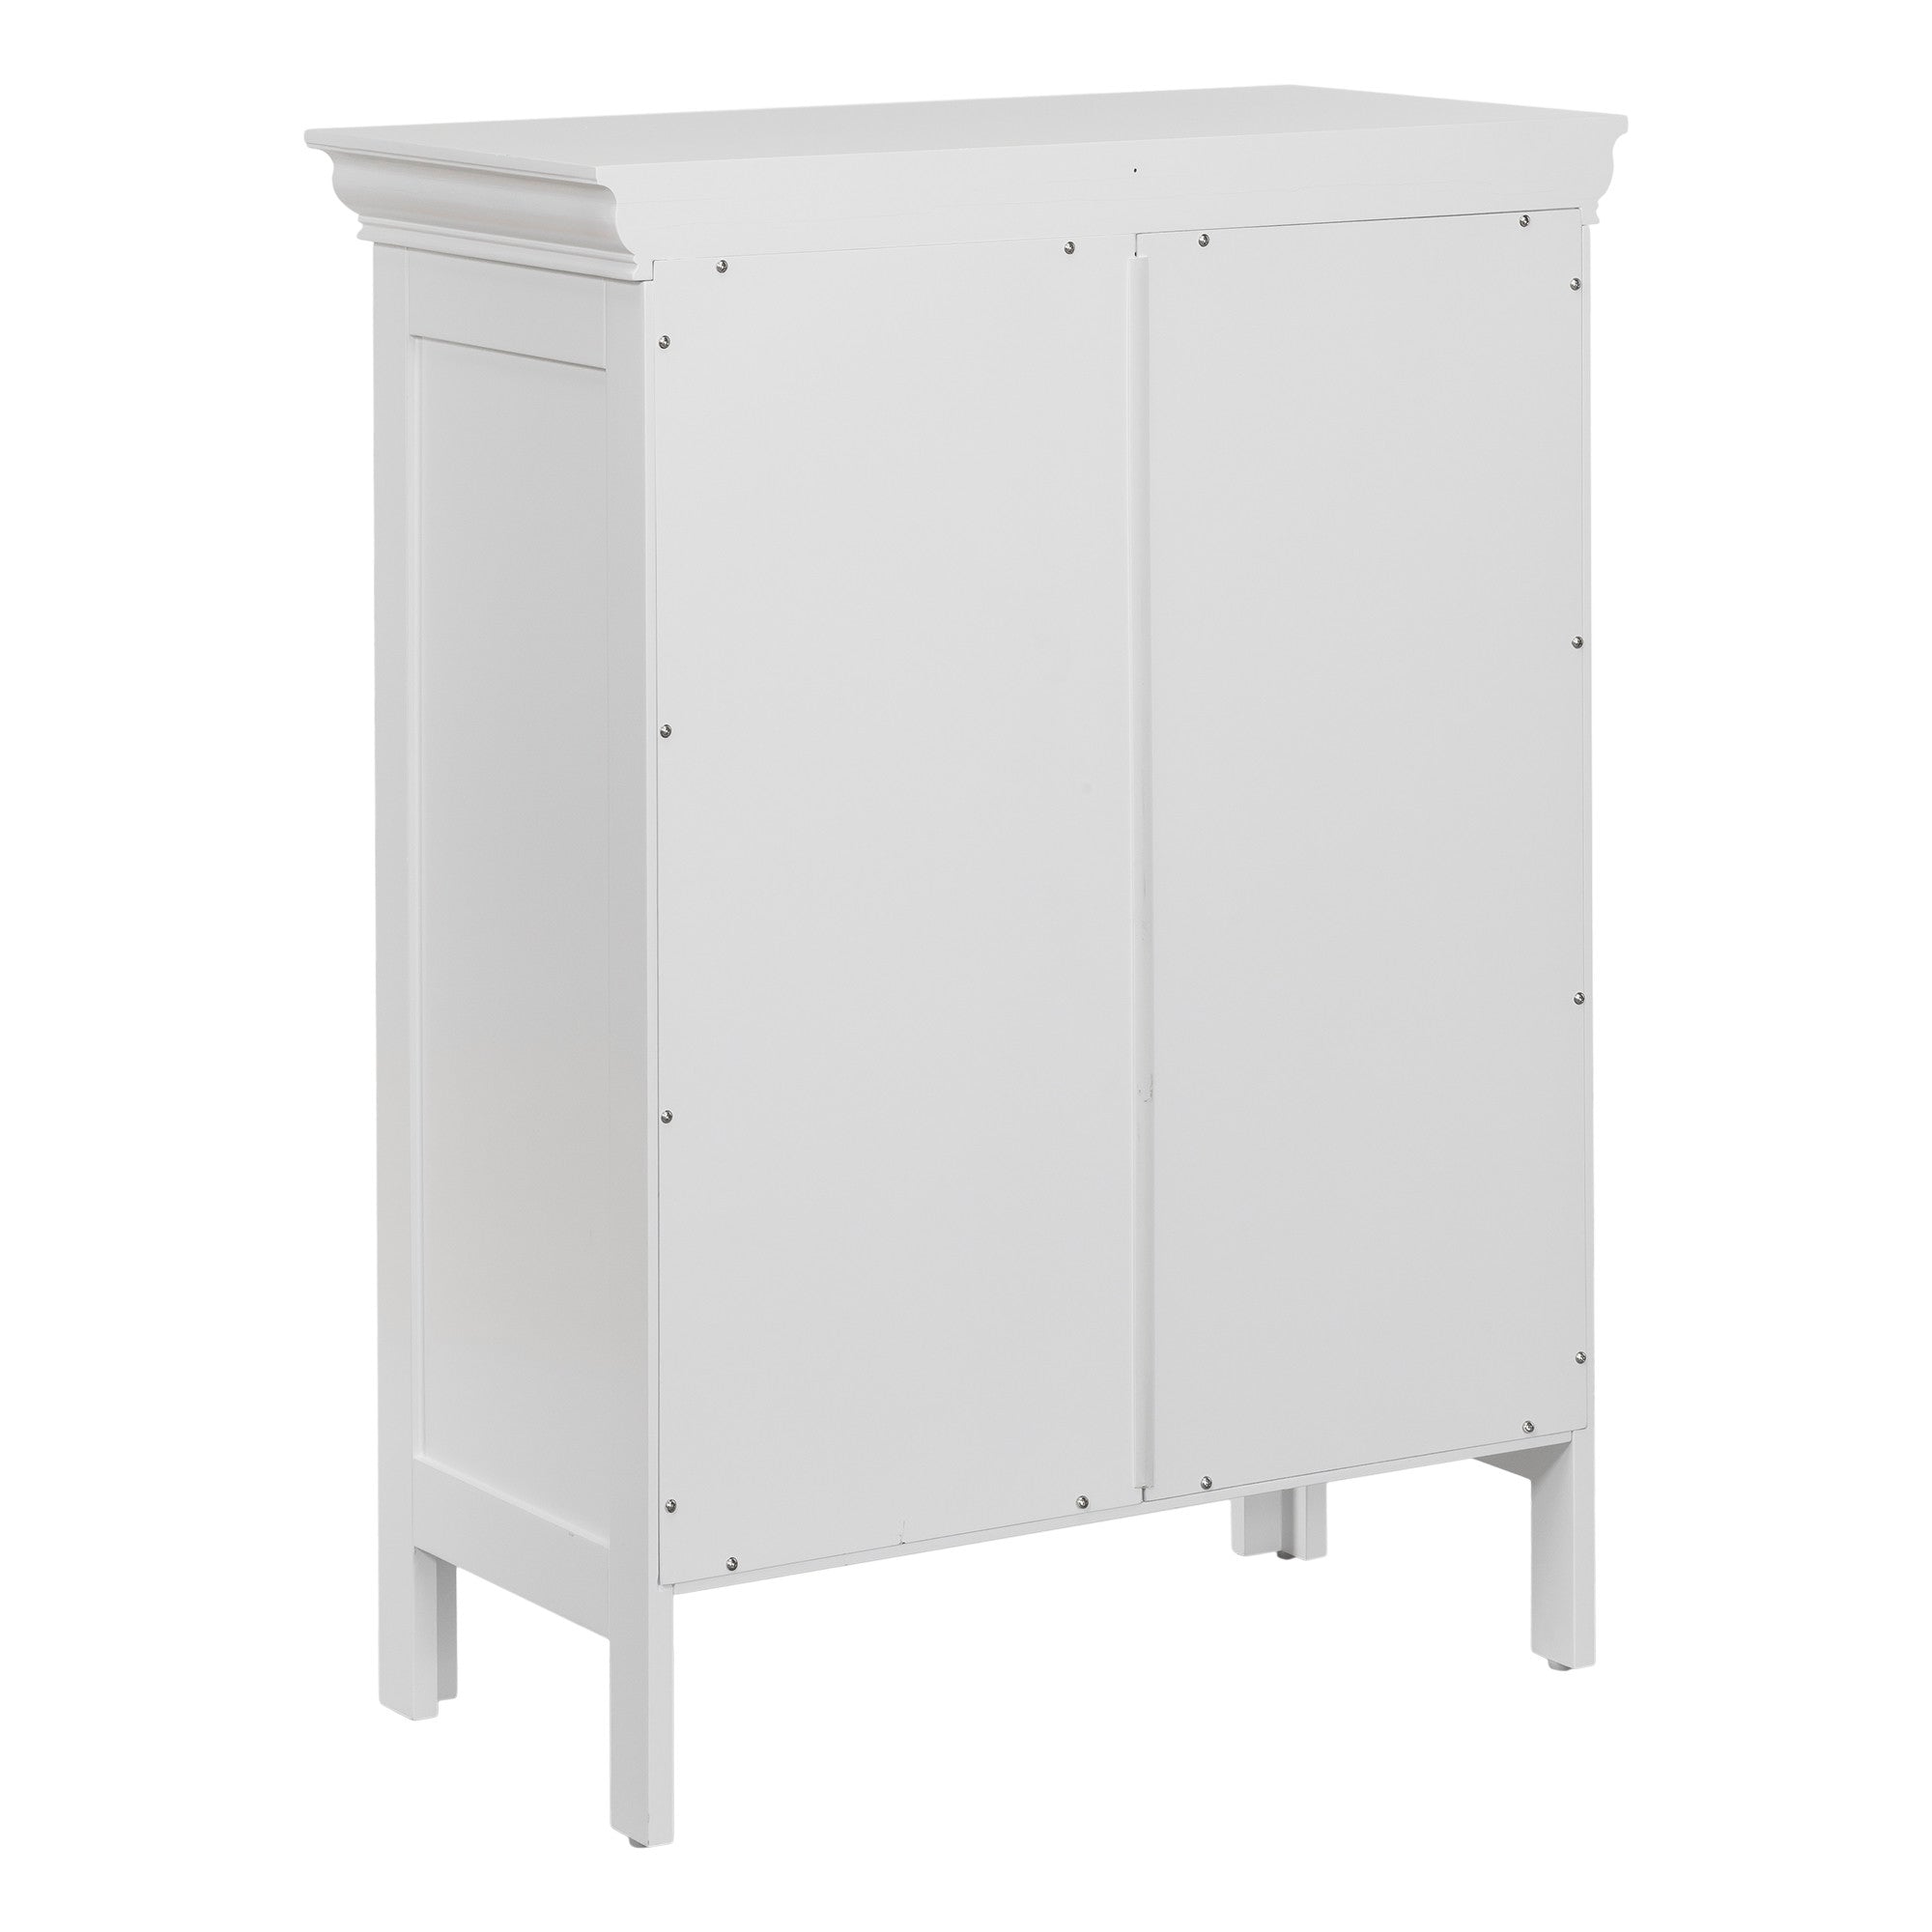 Teamson Home Stratford Wooden Floor Cabinet with 2 Shelves, White